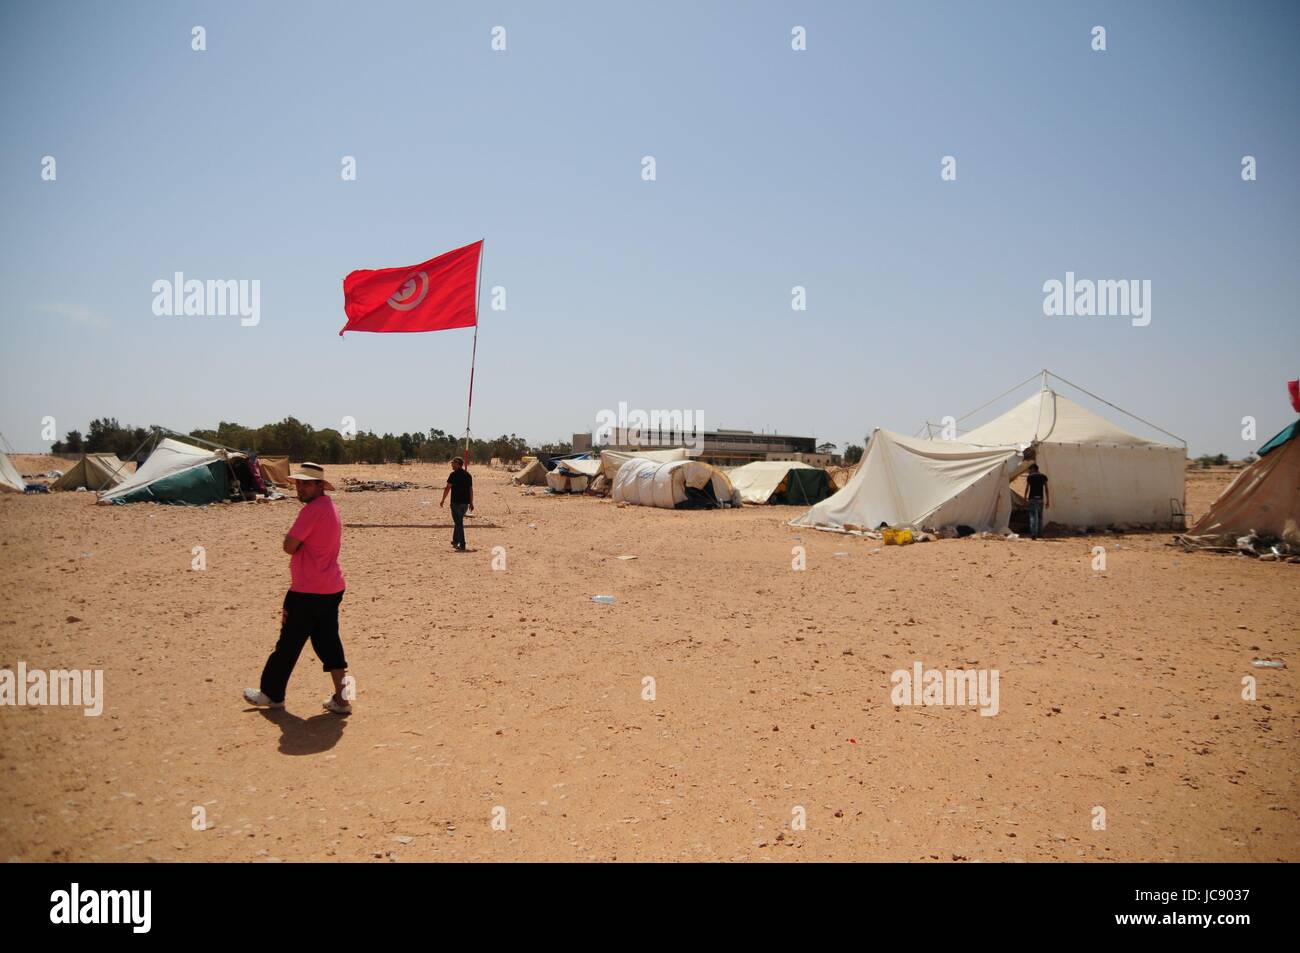 El-Kamour, Tunisia. 26th May, 2017. A protest camp near an oil pumping station in El-Kamour, Tunisia, 26 May 2017. Rural Moroccans and Tunisians who feel that they have been abandoned by their central governments have been protesting in growing numbers over the last couple of weeks. Photo: Simon Kremer/dpa/Alamy Live News Stock Photo